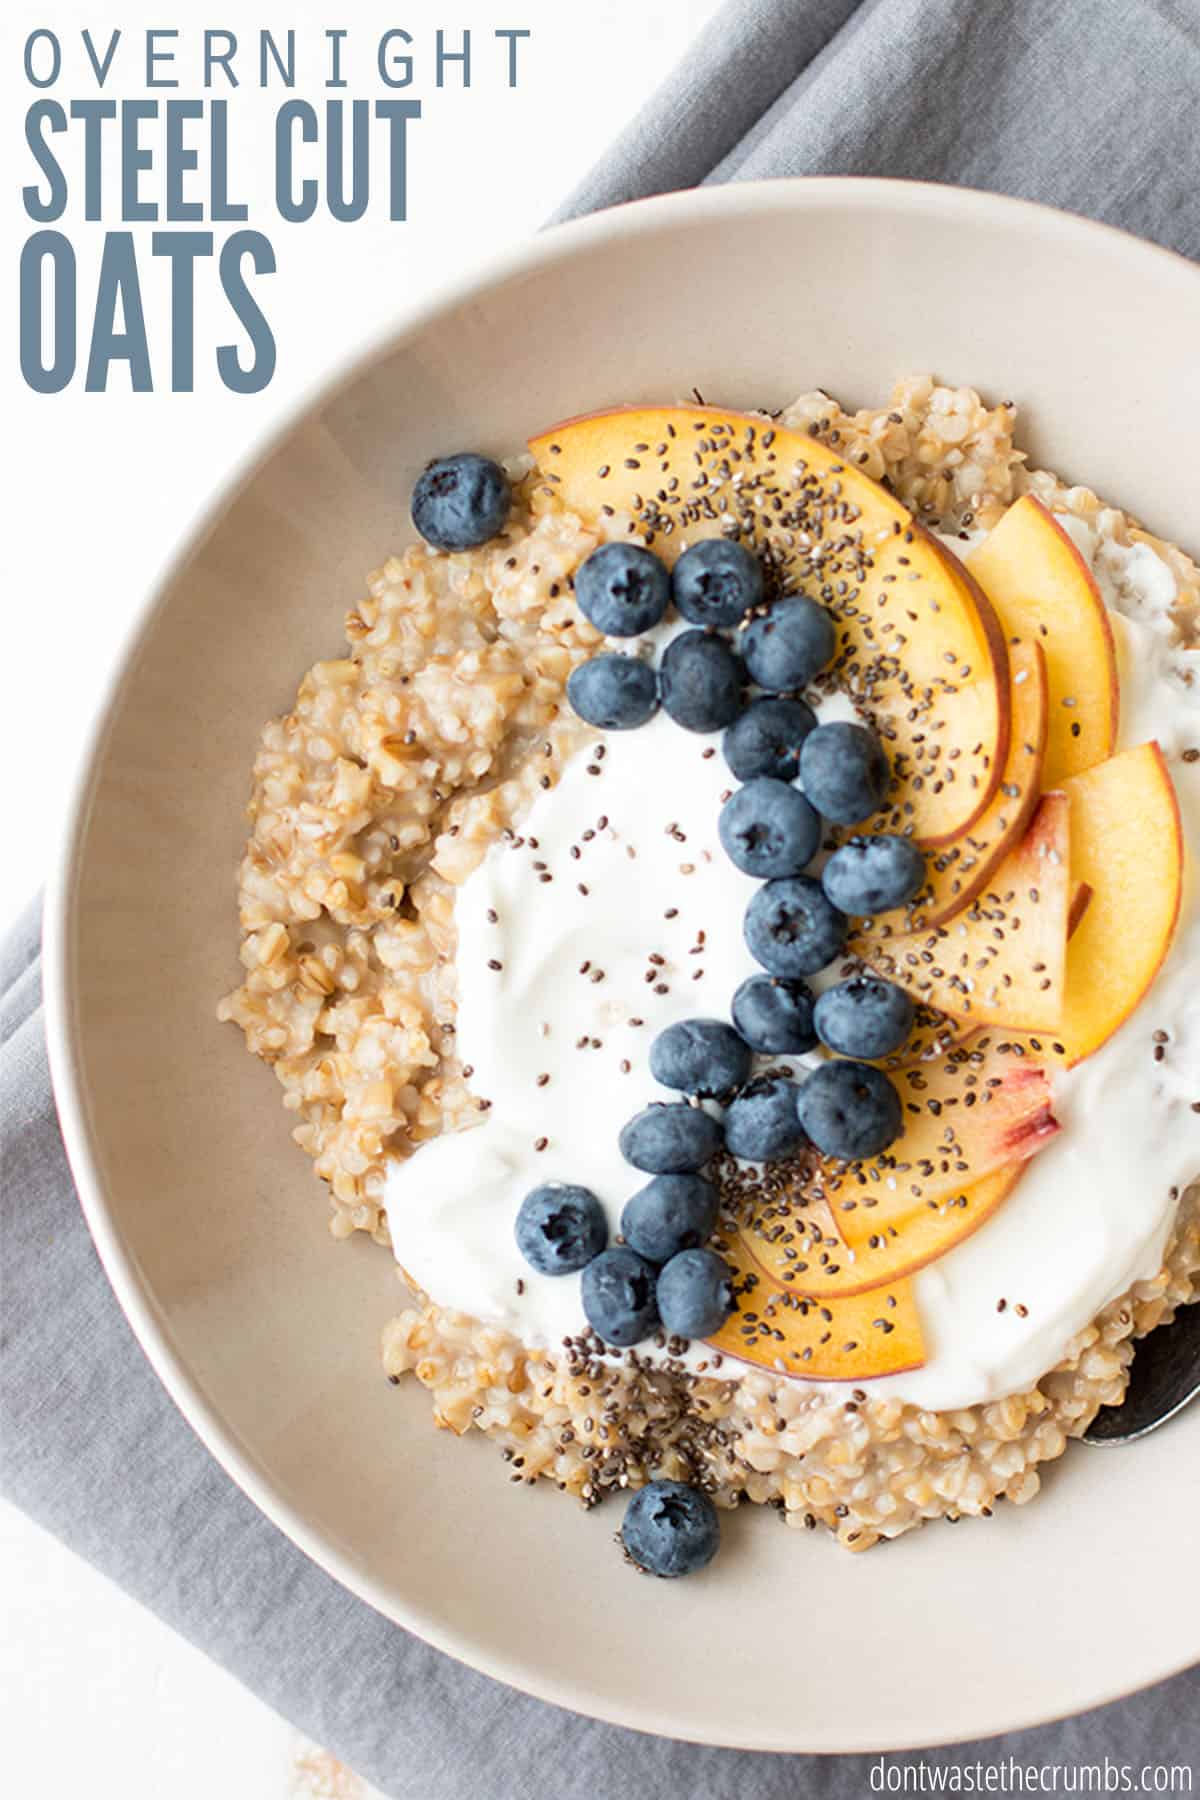 A bowl of steel cut oats is topped with yogurt, blueberries, and peach slices. Text overlay reads "Overnight Steel Cut Oats."